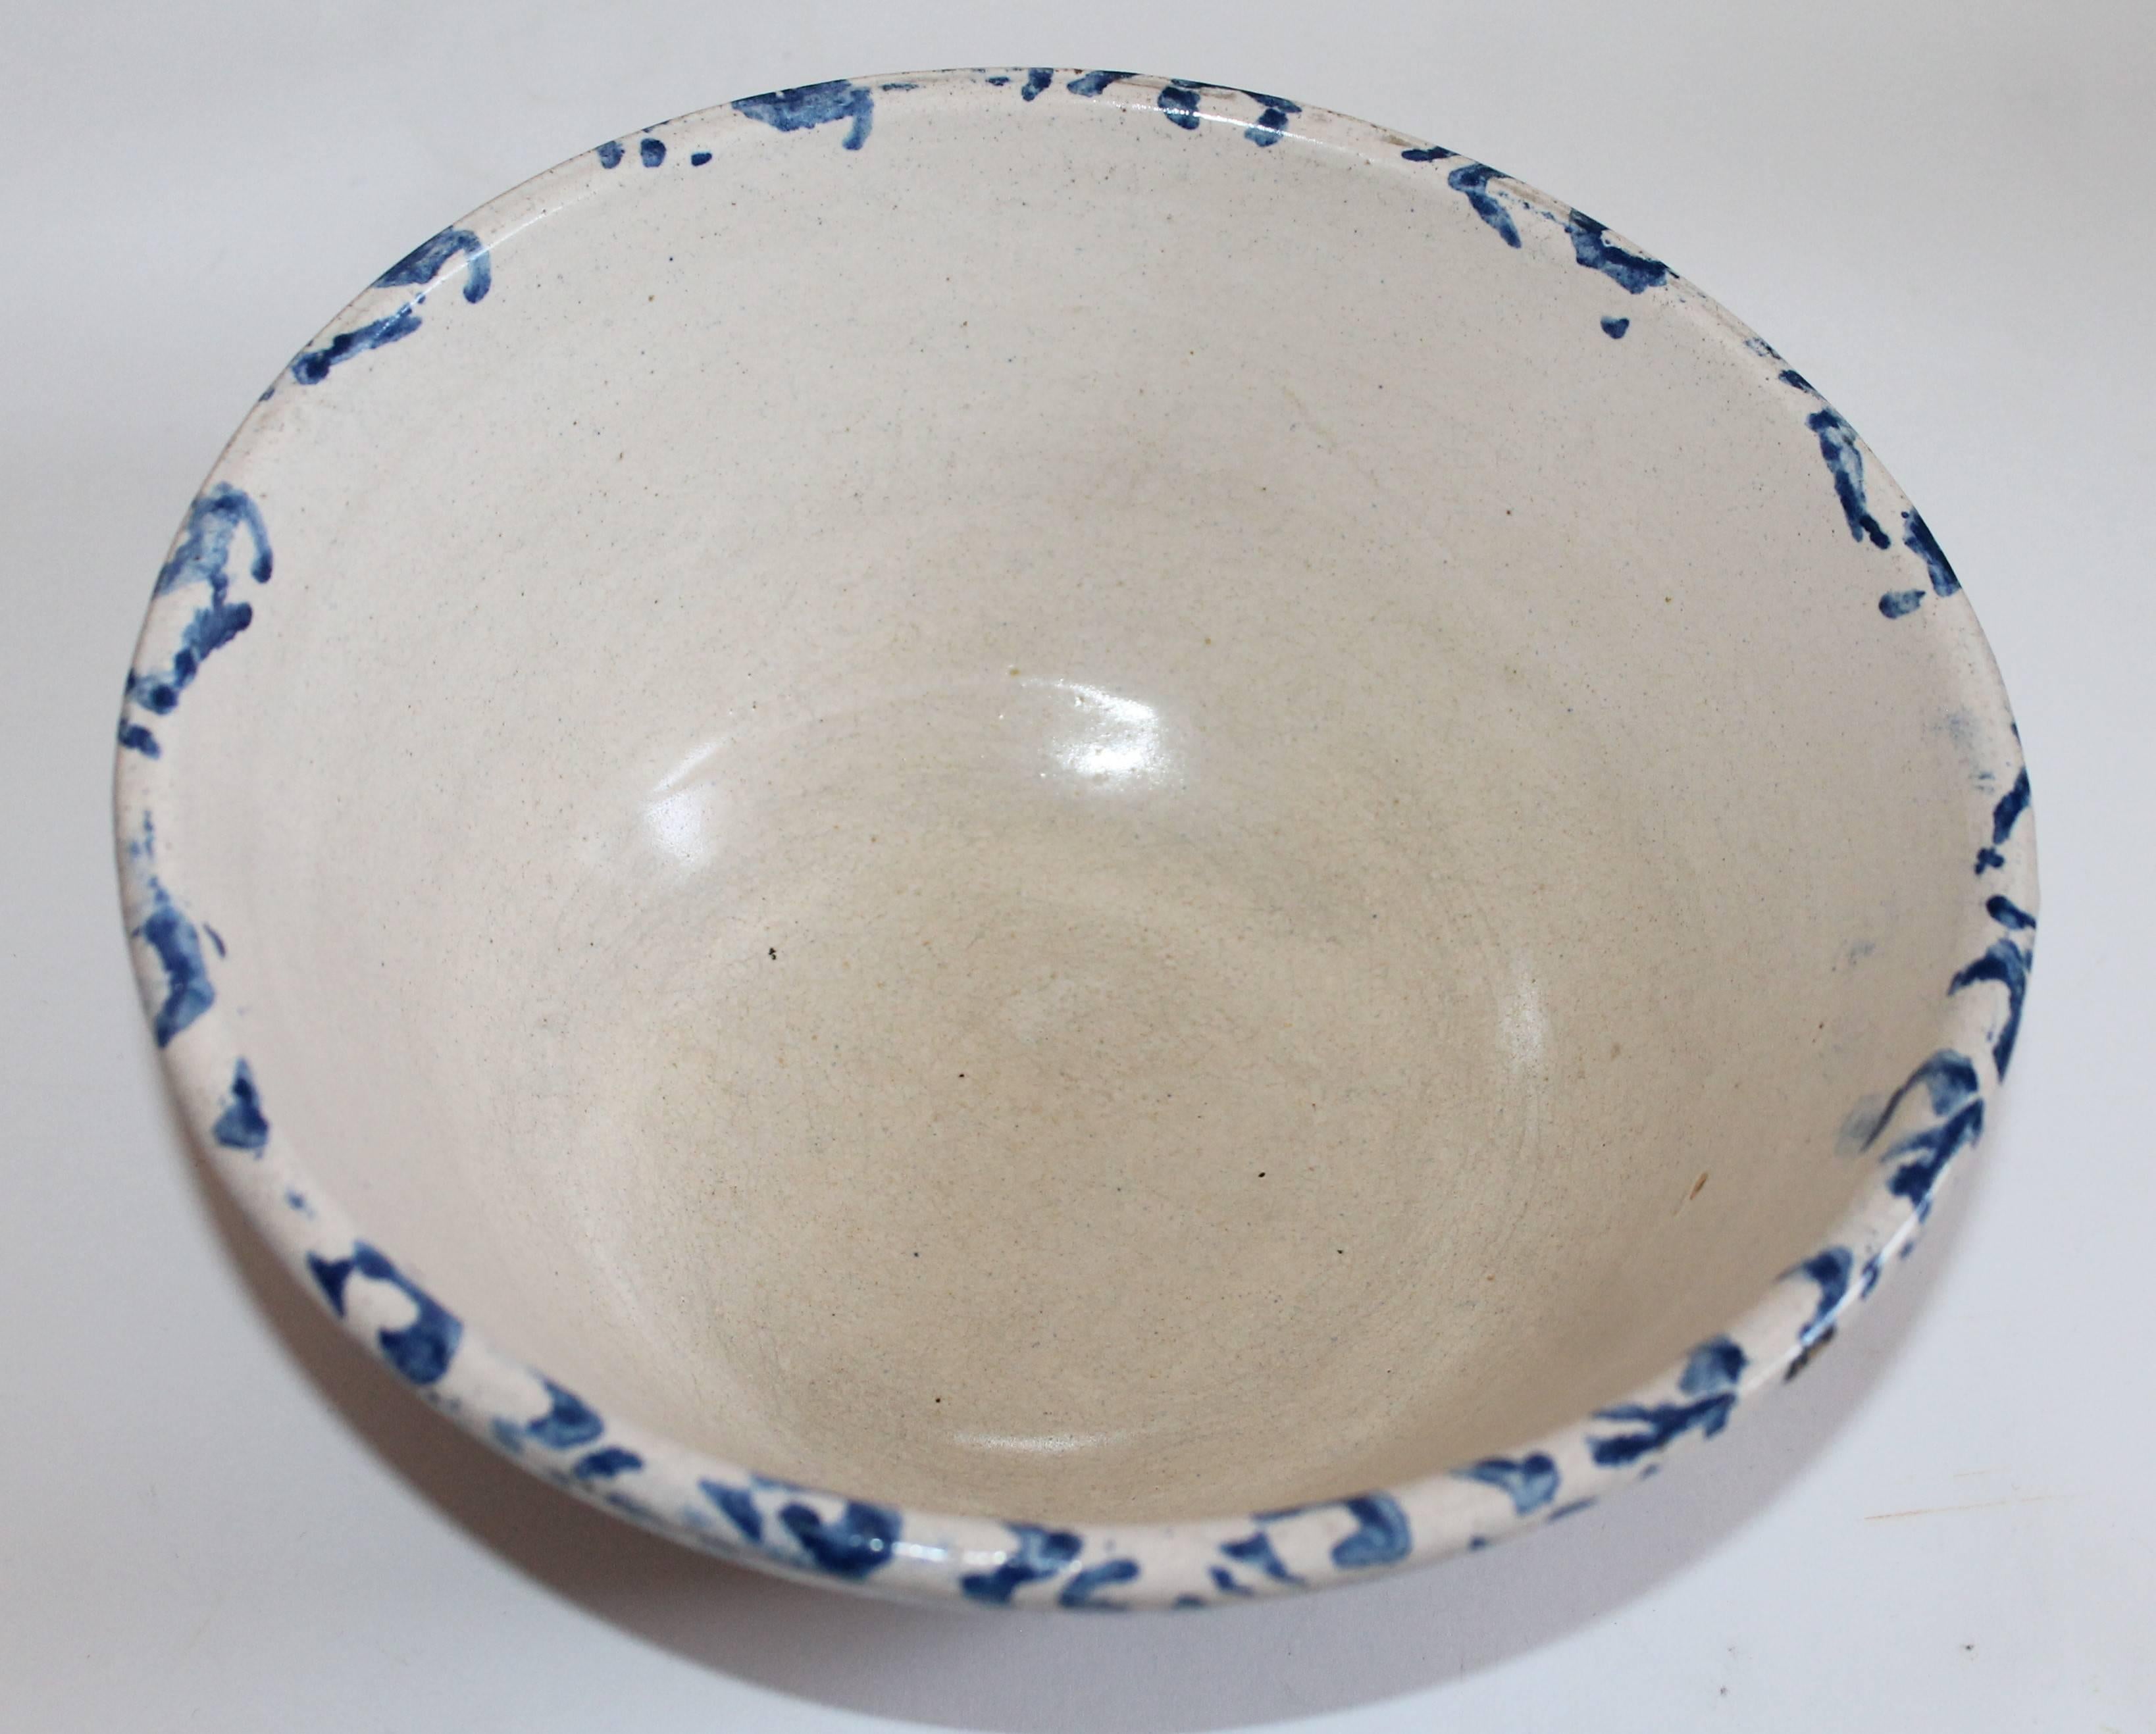 19th century blue and white sponge ware mixing or batter bowl. With clam shell design. The condition is mint.